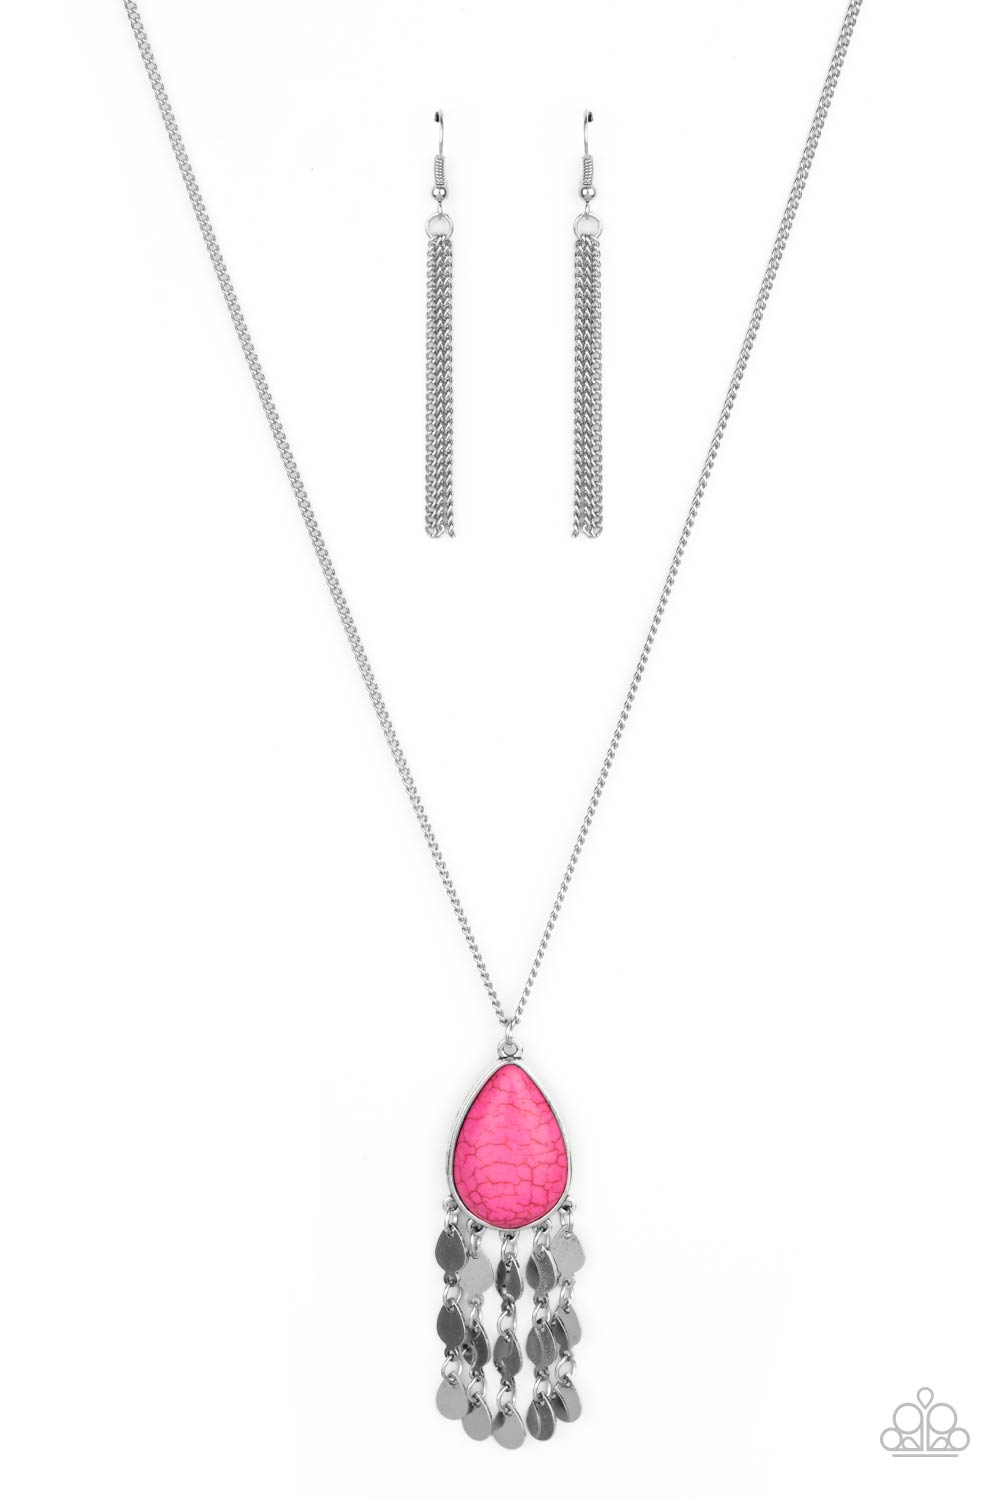 Musically Mojave Pink Stone Necklace - Paparazzi Accessories- lightbox - CarasShop.com - $5 Jewelry by Cara Jewels